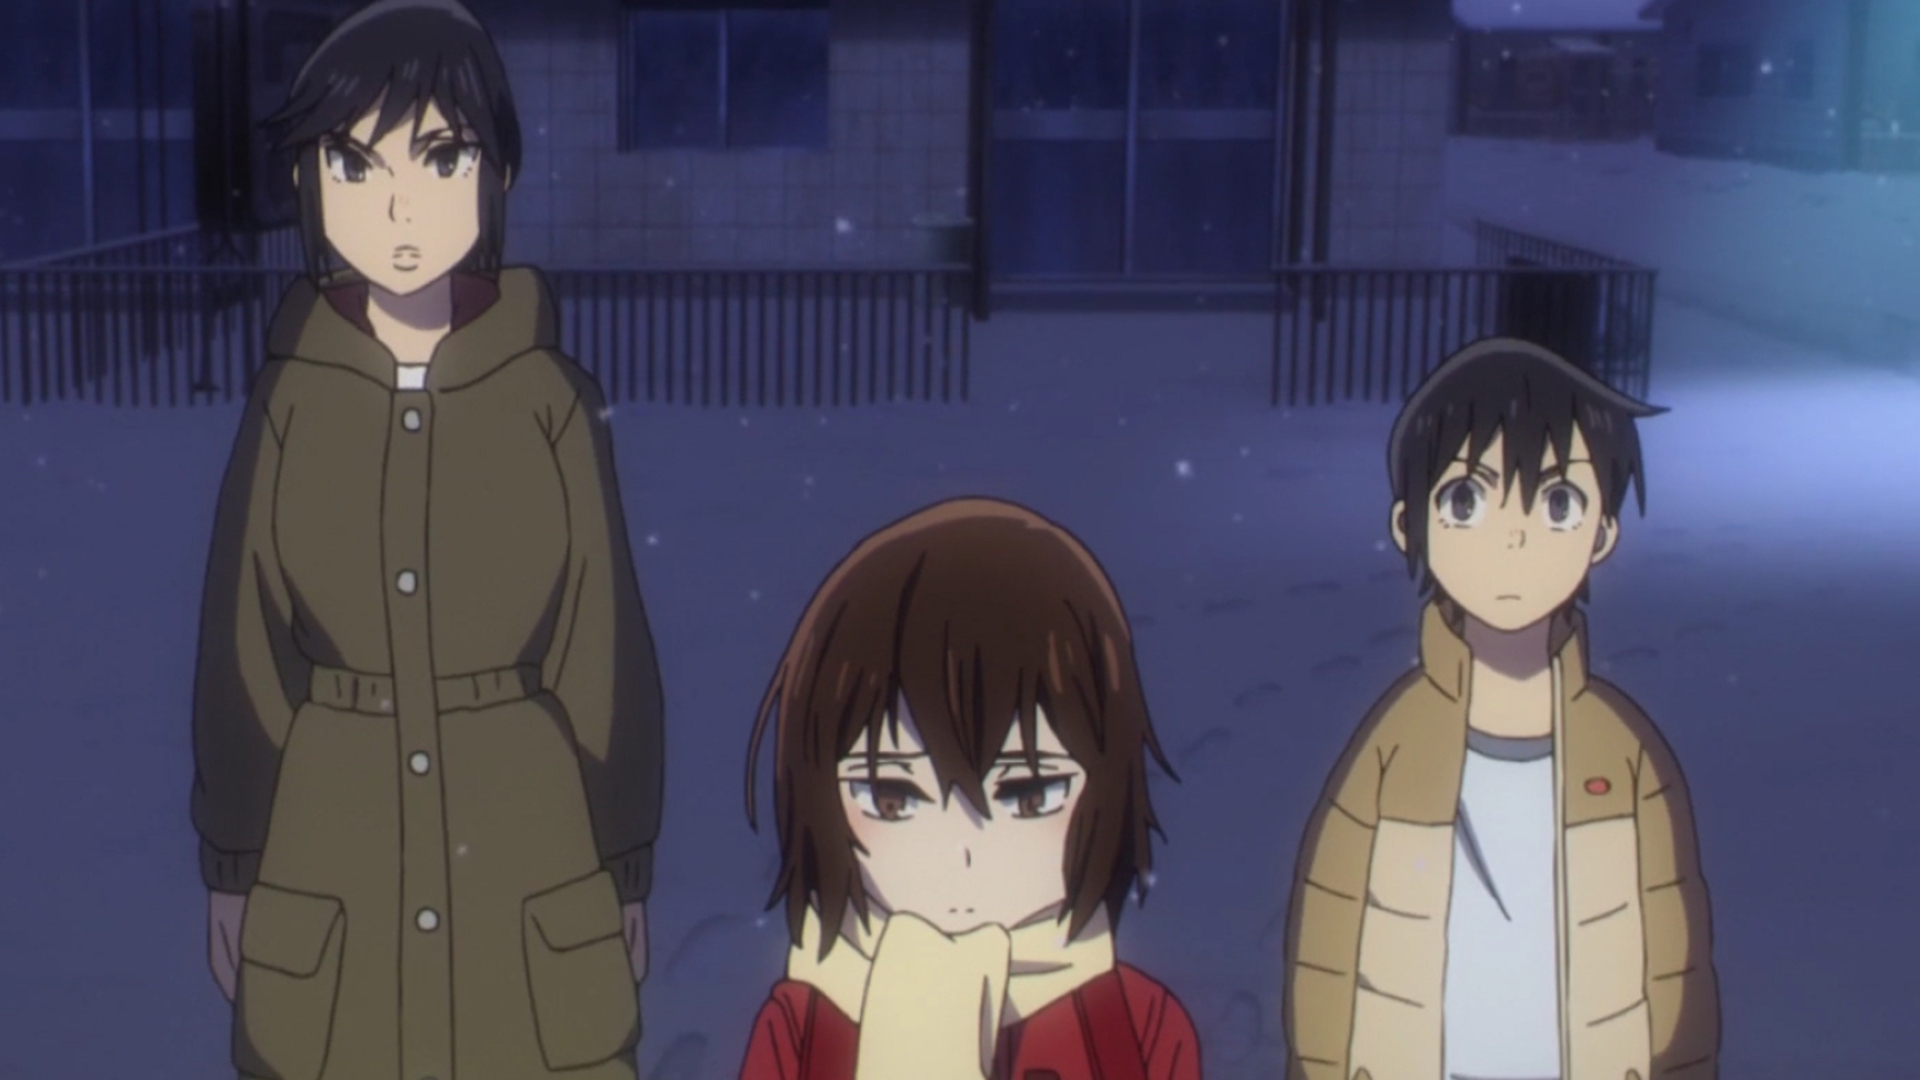 Erased Anime, Vol 2 review, Time travel mystery, Anime and manga, 1920x1080 Full HD Desktop